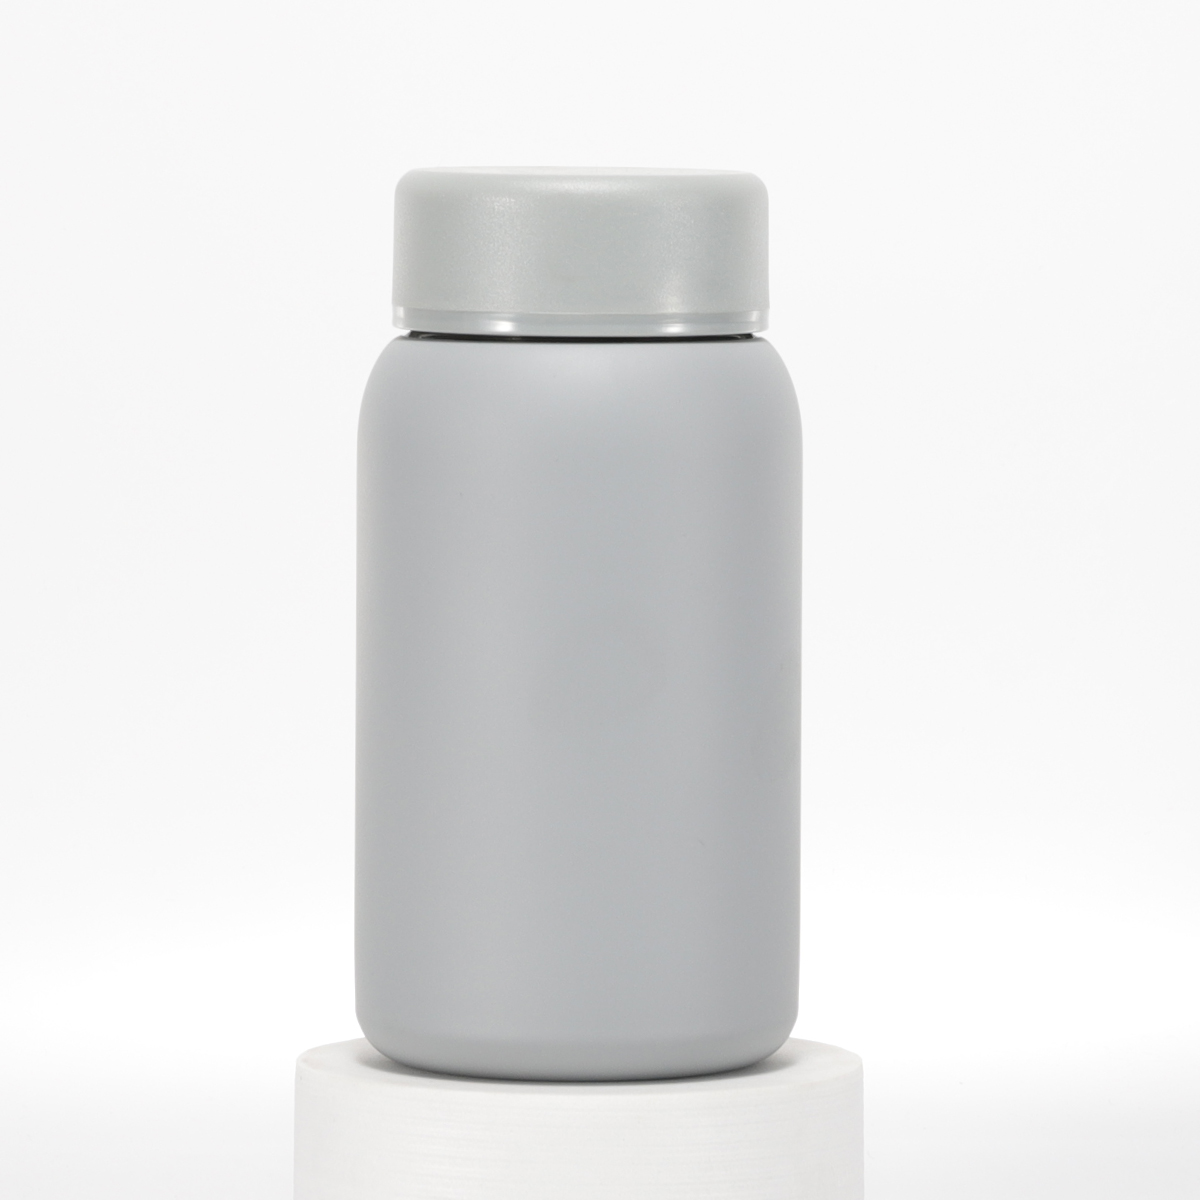 Selection of thermos cups–how to avoid choosing some functions that are useless?